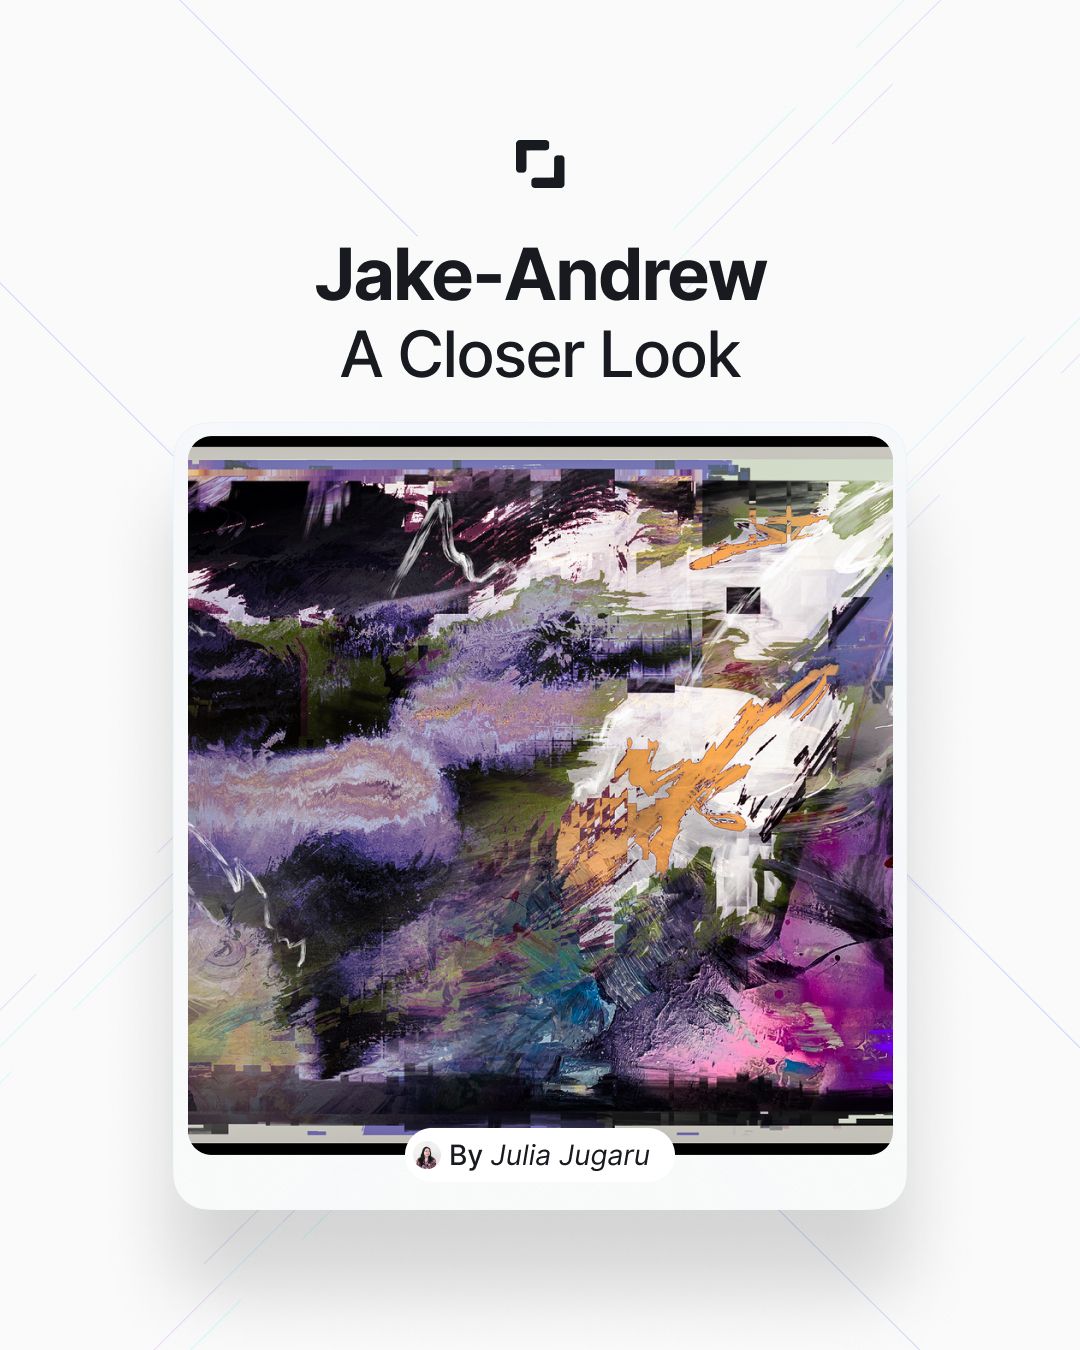 Jake-Andrew: A closer look